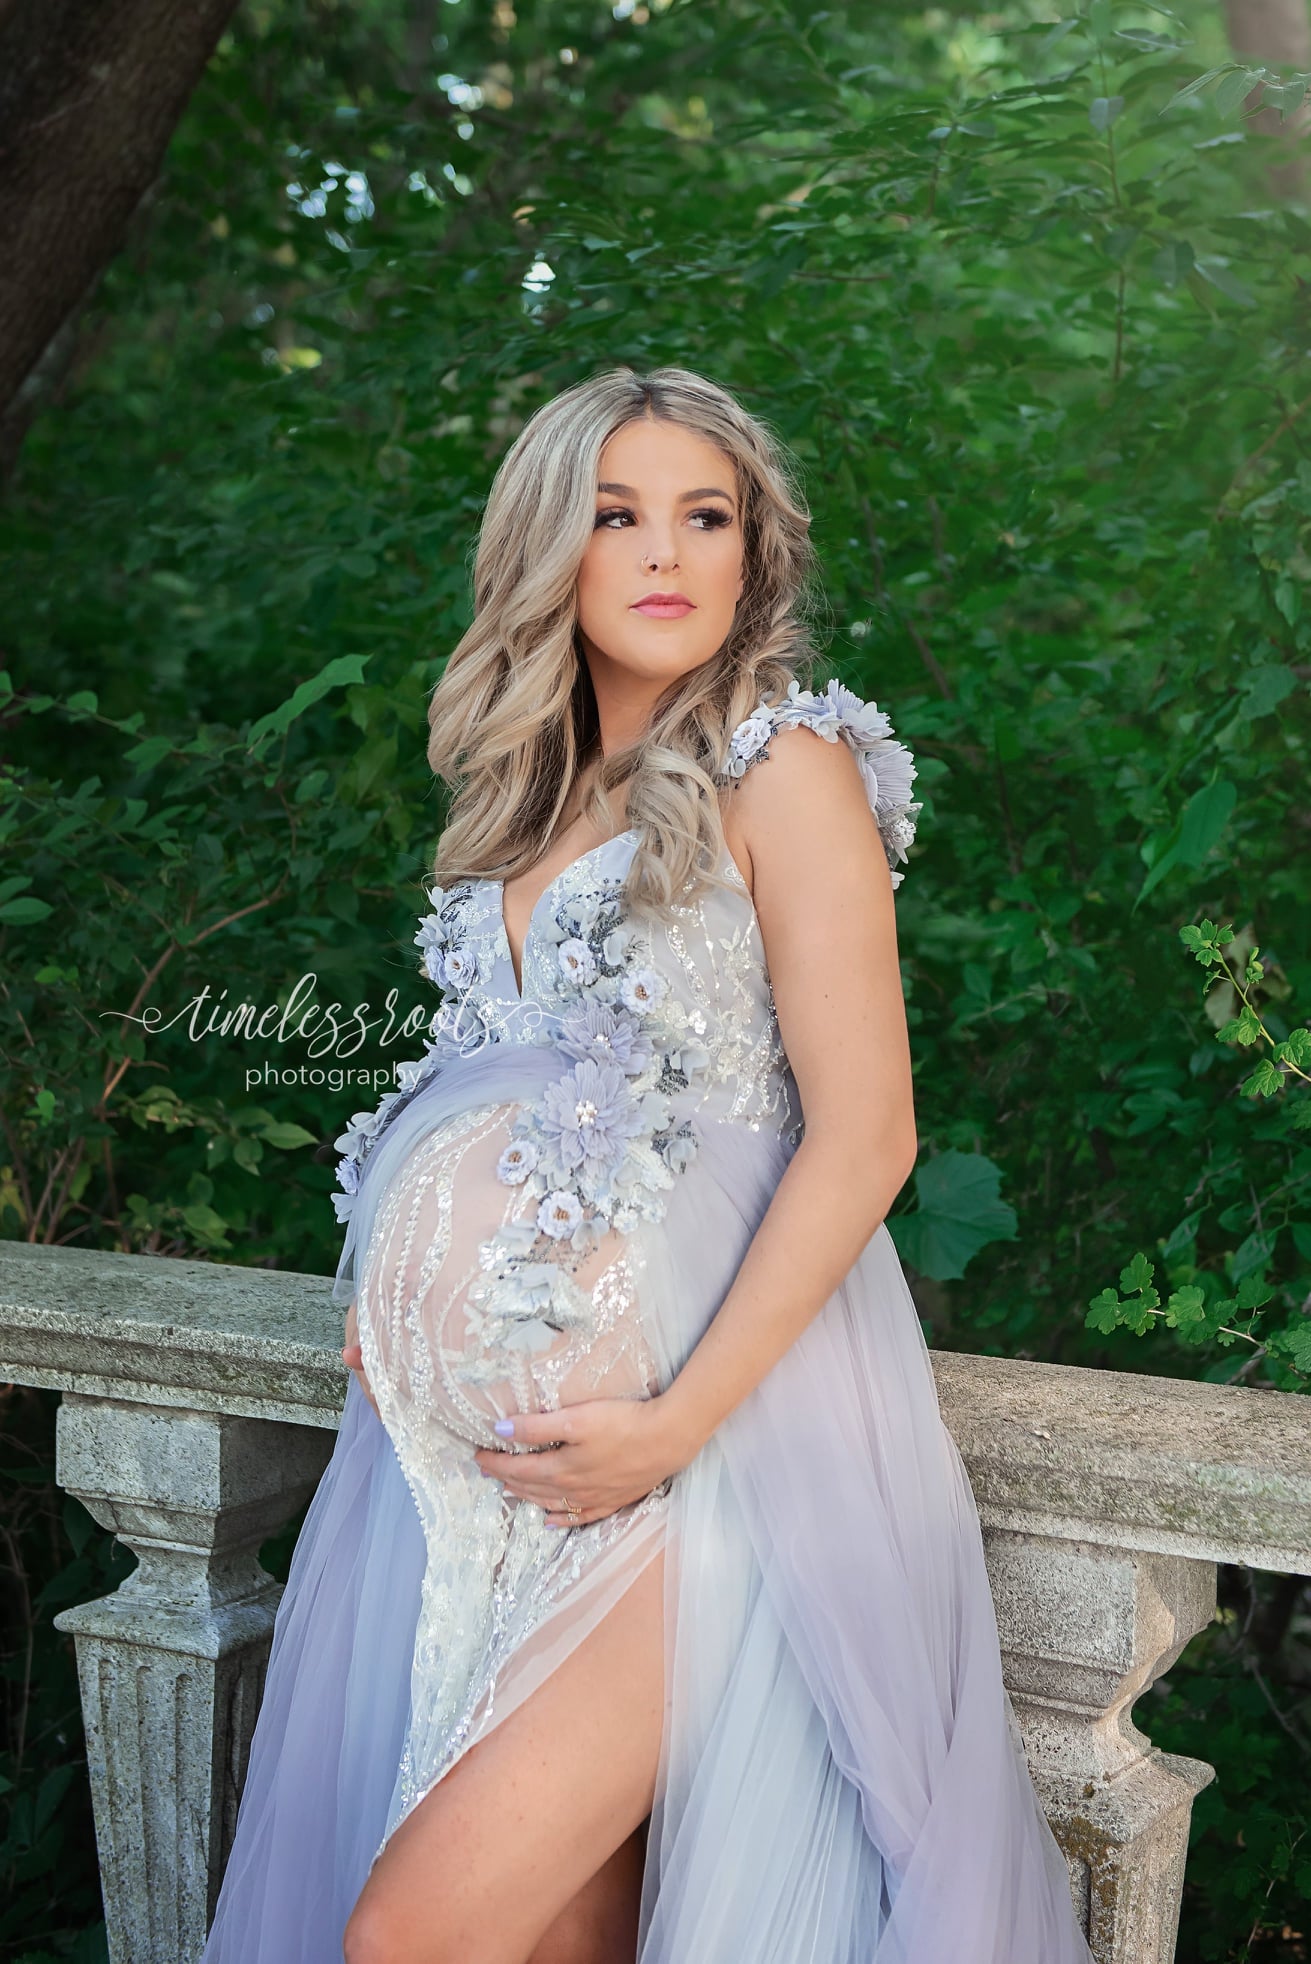 Gray / Lilac Run Away With Me Gown - maternity photoshoot dress